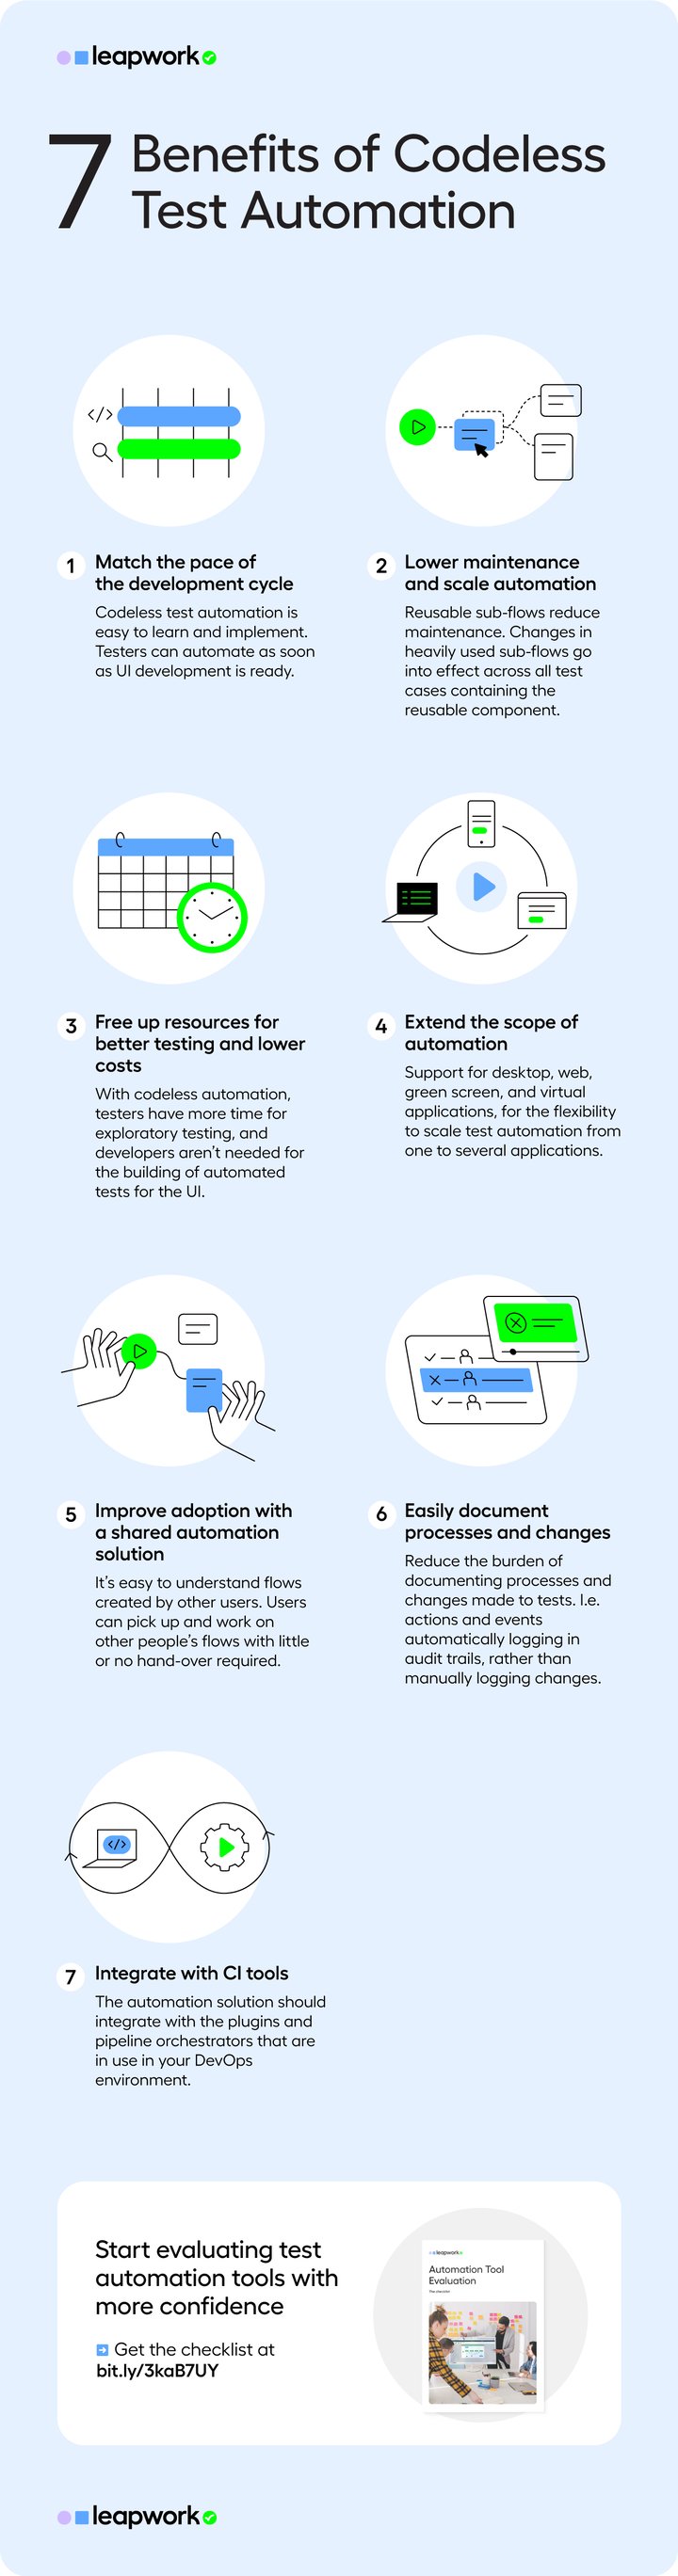 An infographic on benefits of codeless test automation